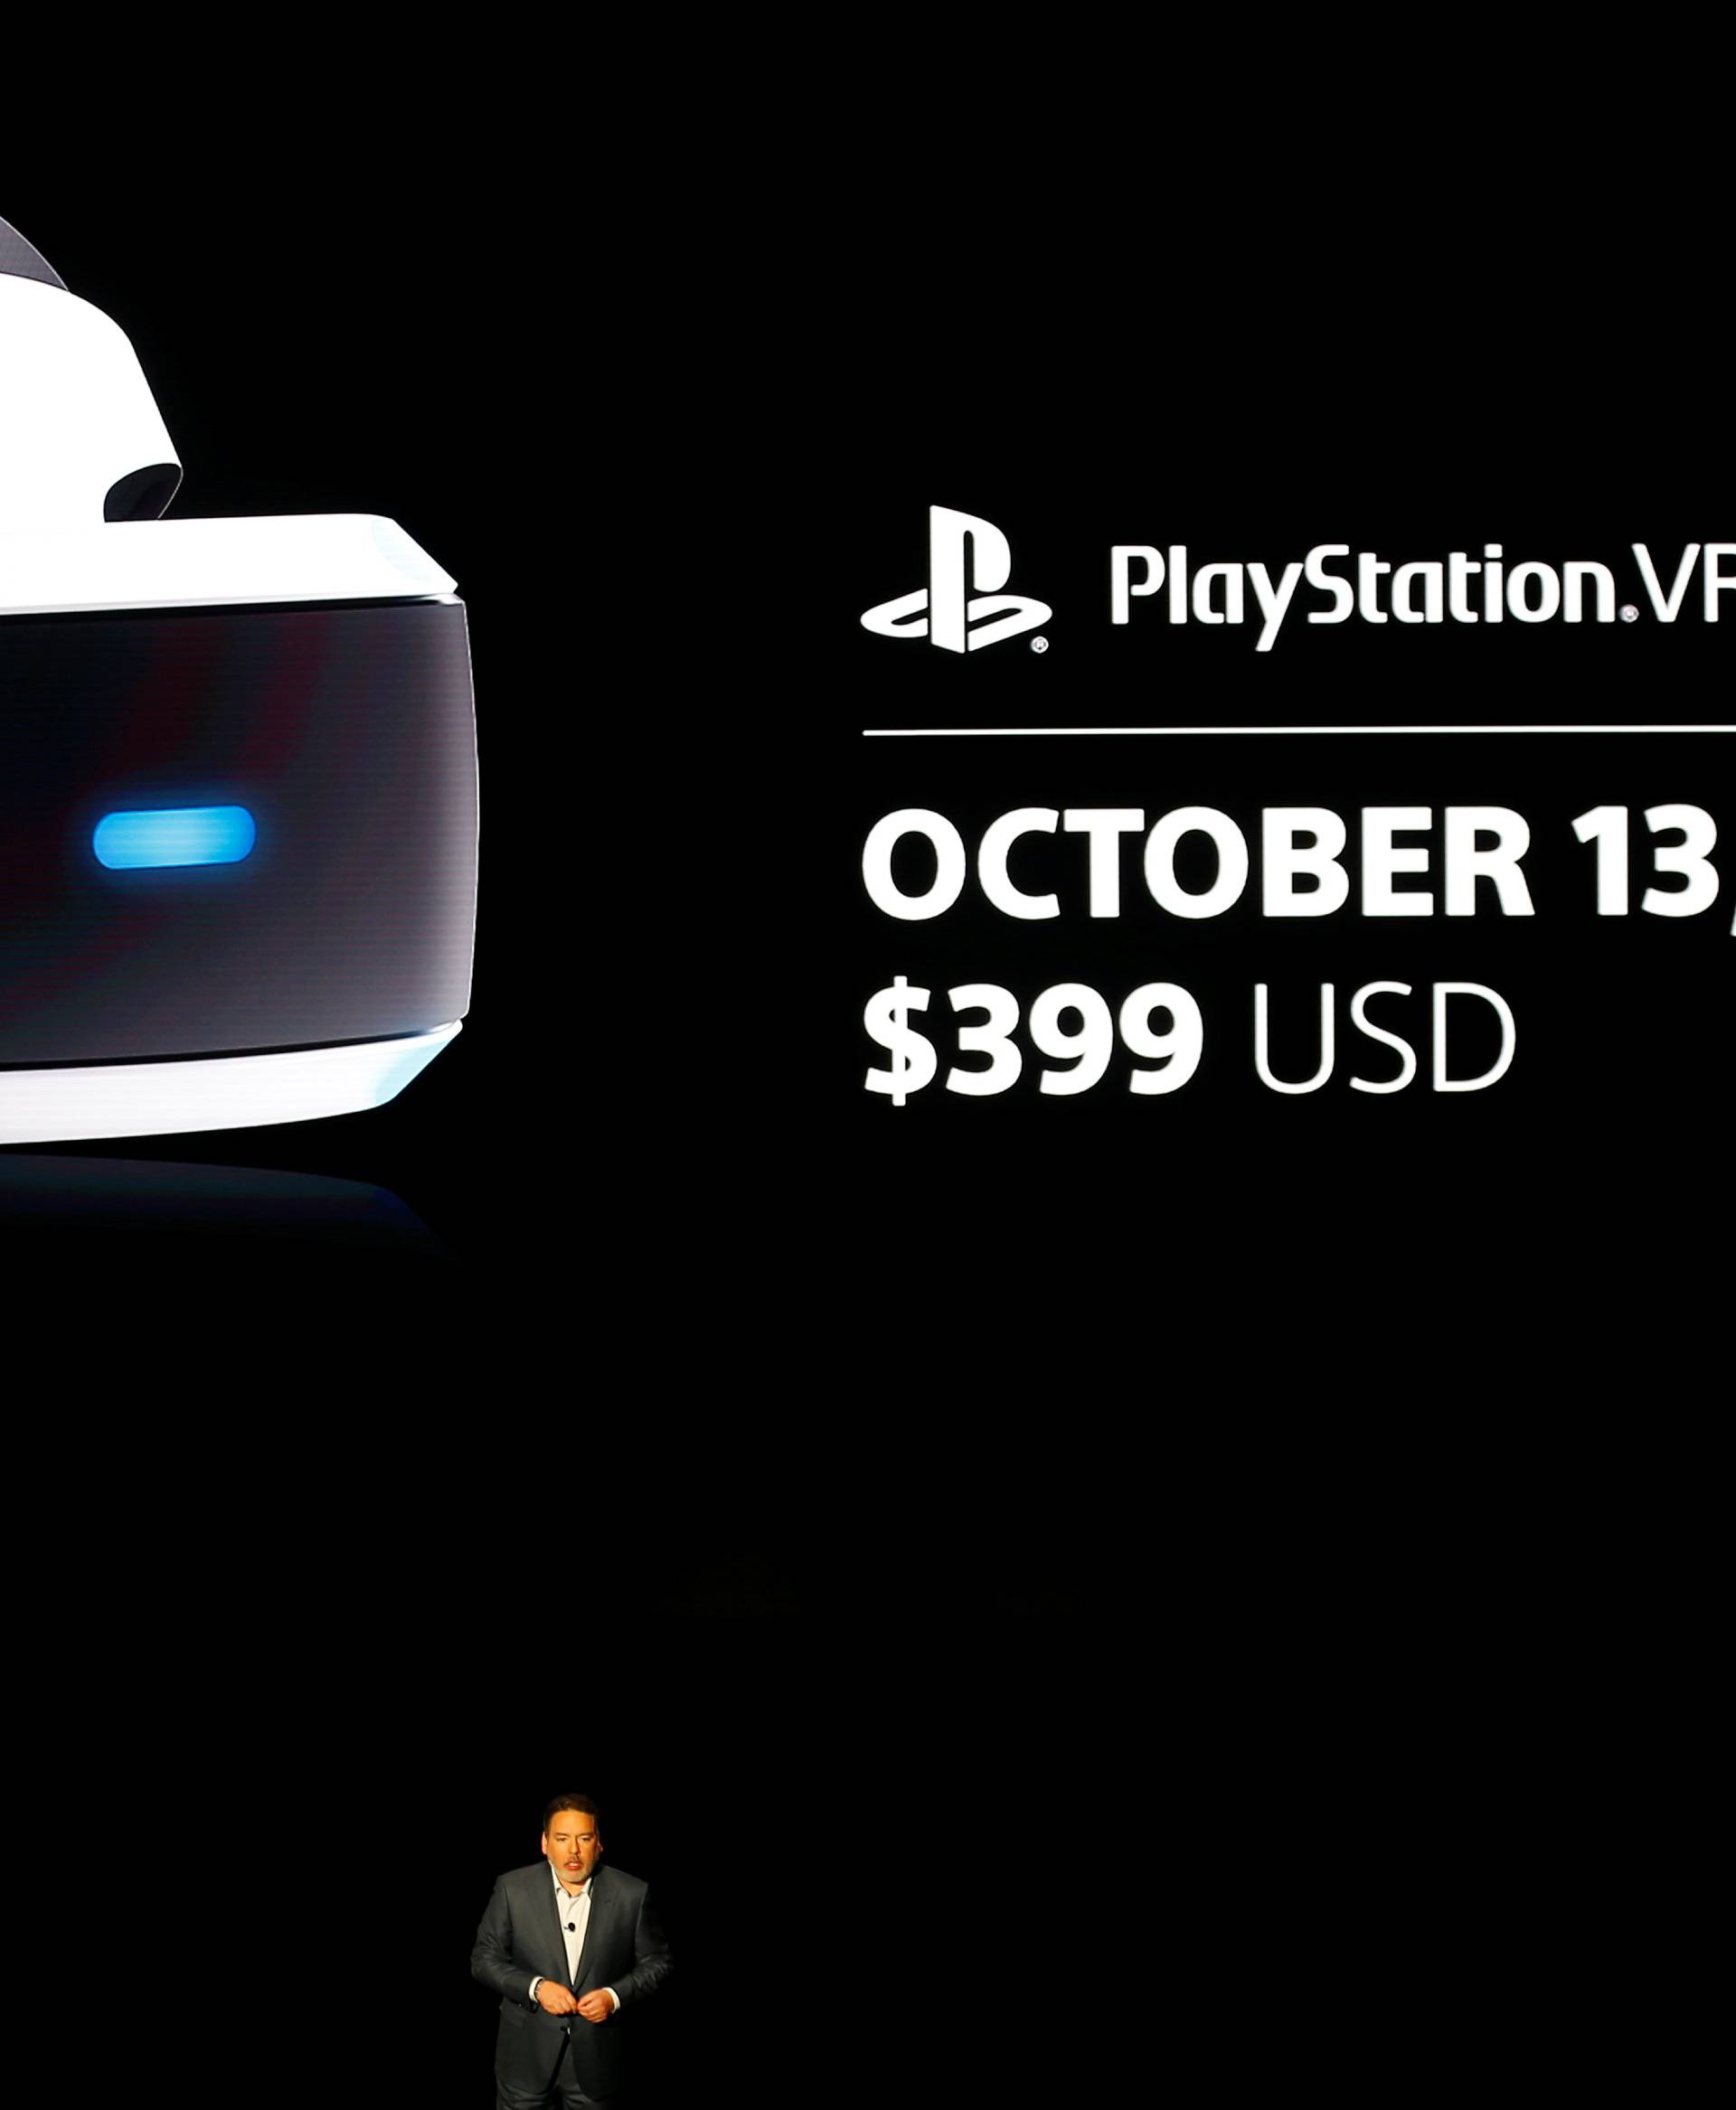 Sony Interactive Entertainment Chairman Shawn Layden introduces the price and sale date of PlayStation 4 VR during a presentation at E3 2016 in Los Angeles